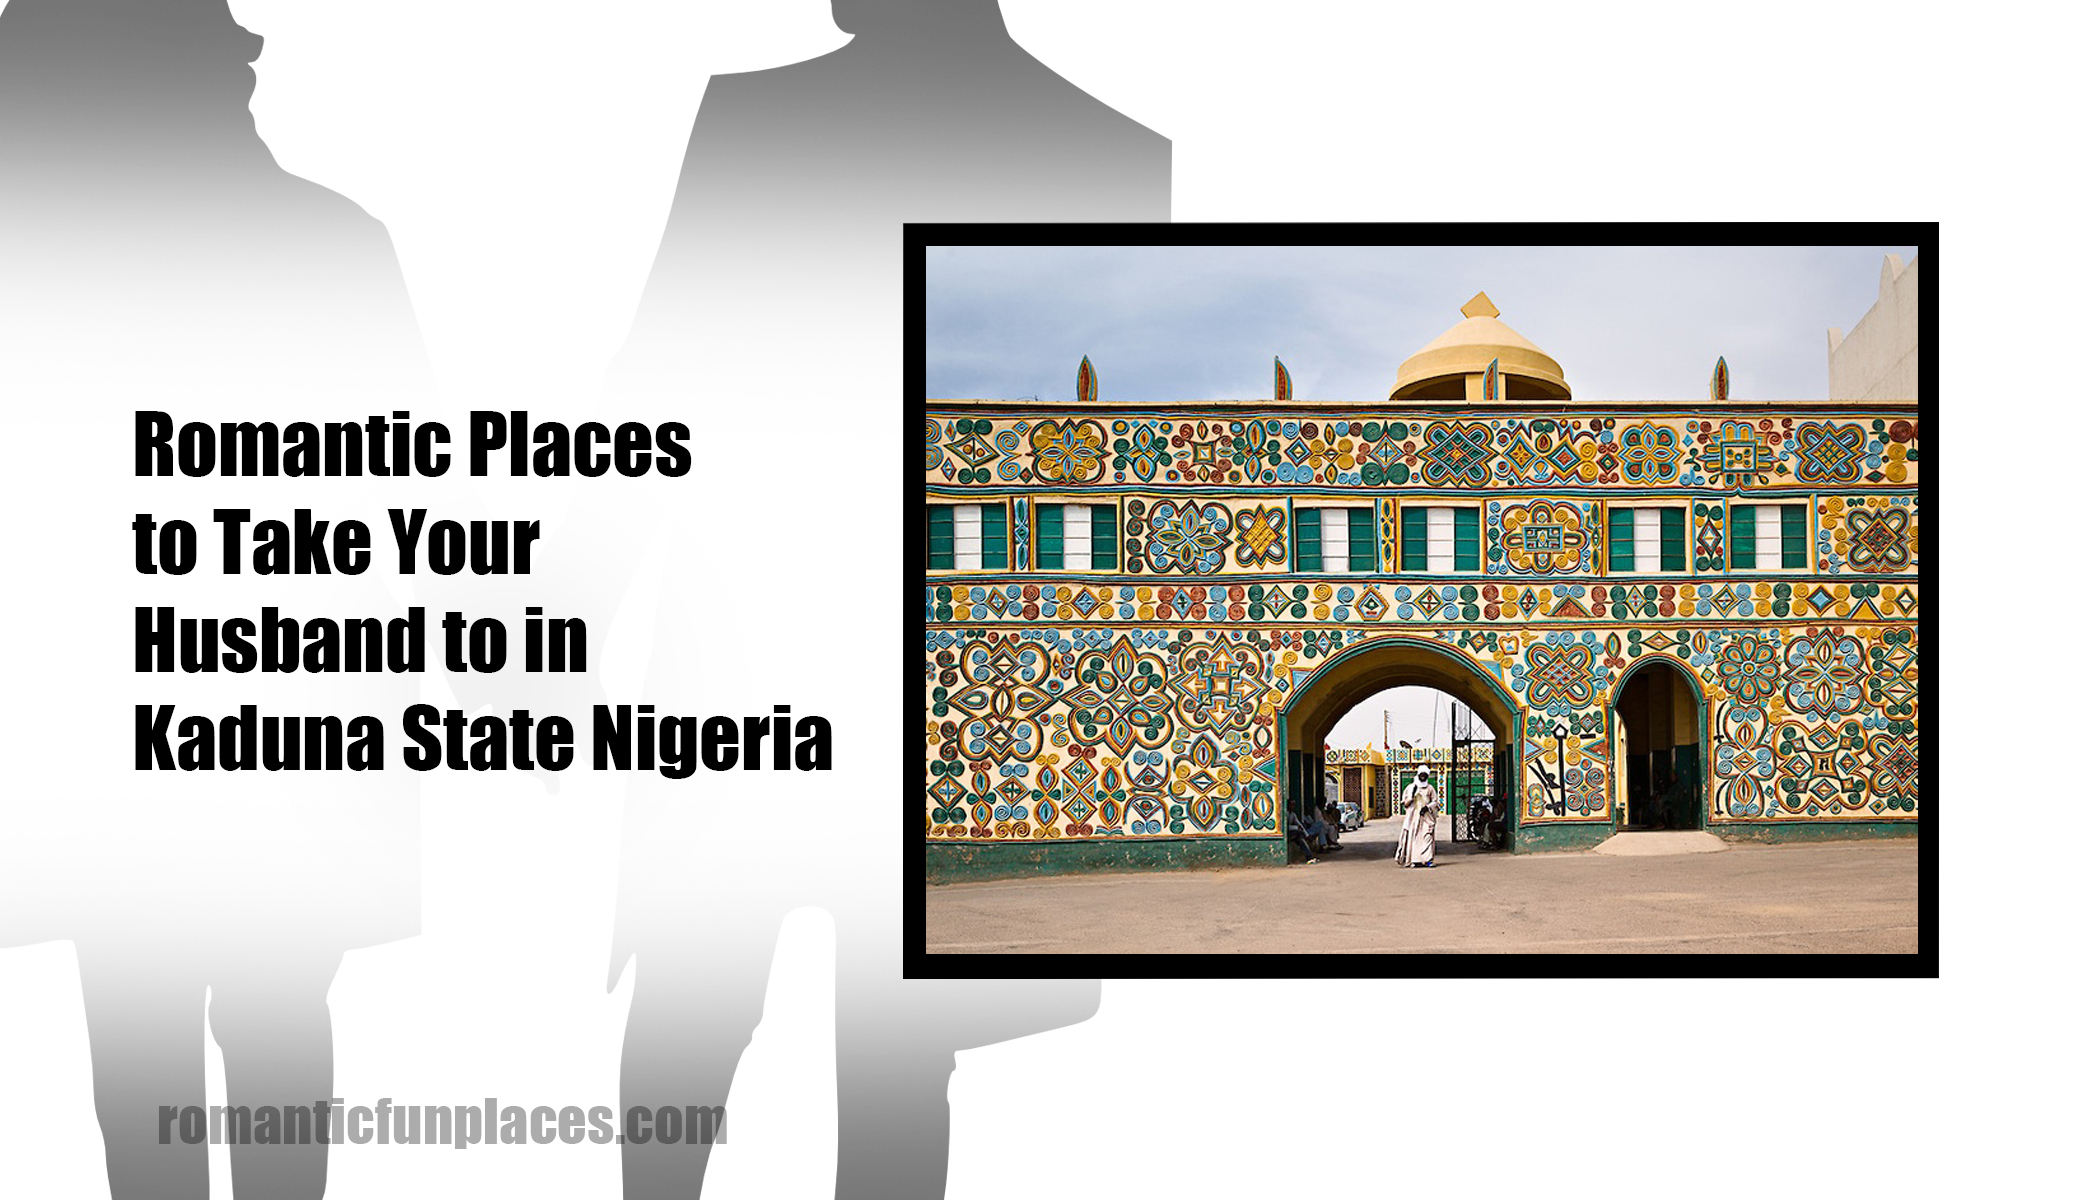 Romantic Places to Take Your Husband to in Kaduna State Nigeria